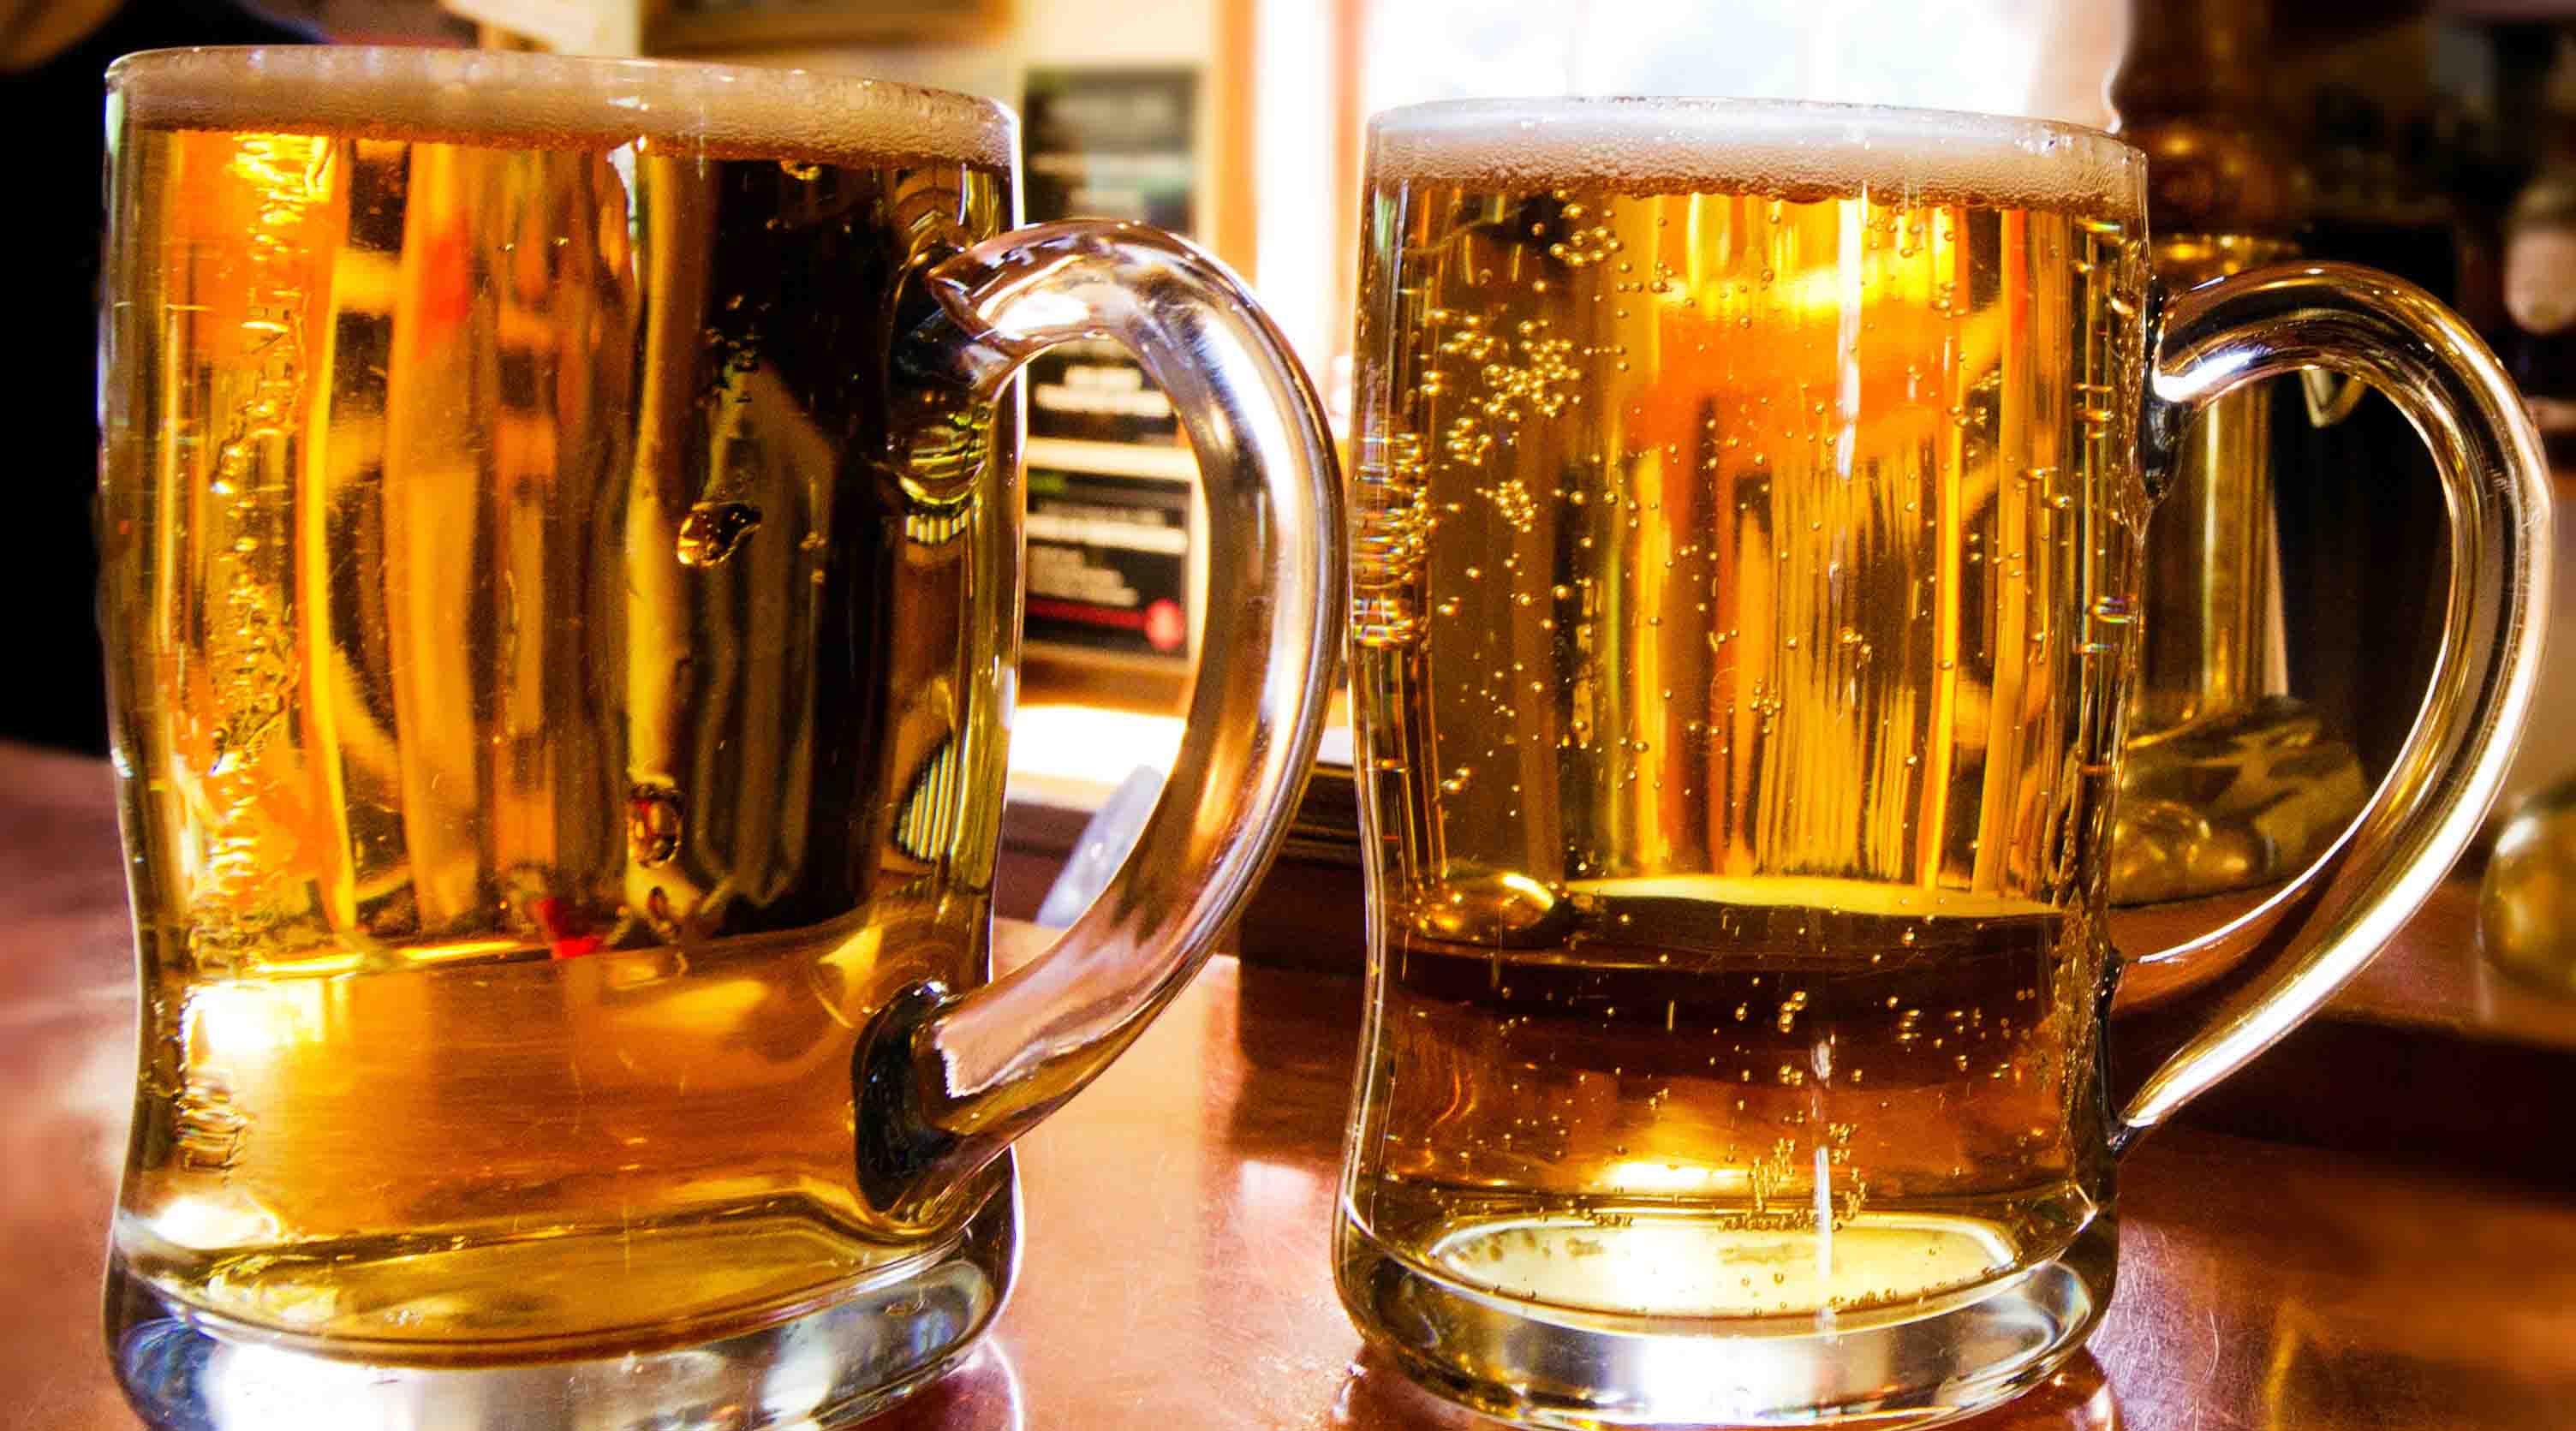 CGA has calculated that an additional 145 million pints of beer will be sold through the sector compared with what would have been sold with Social Distancing set at two metres.